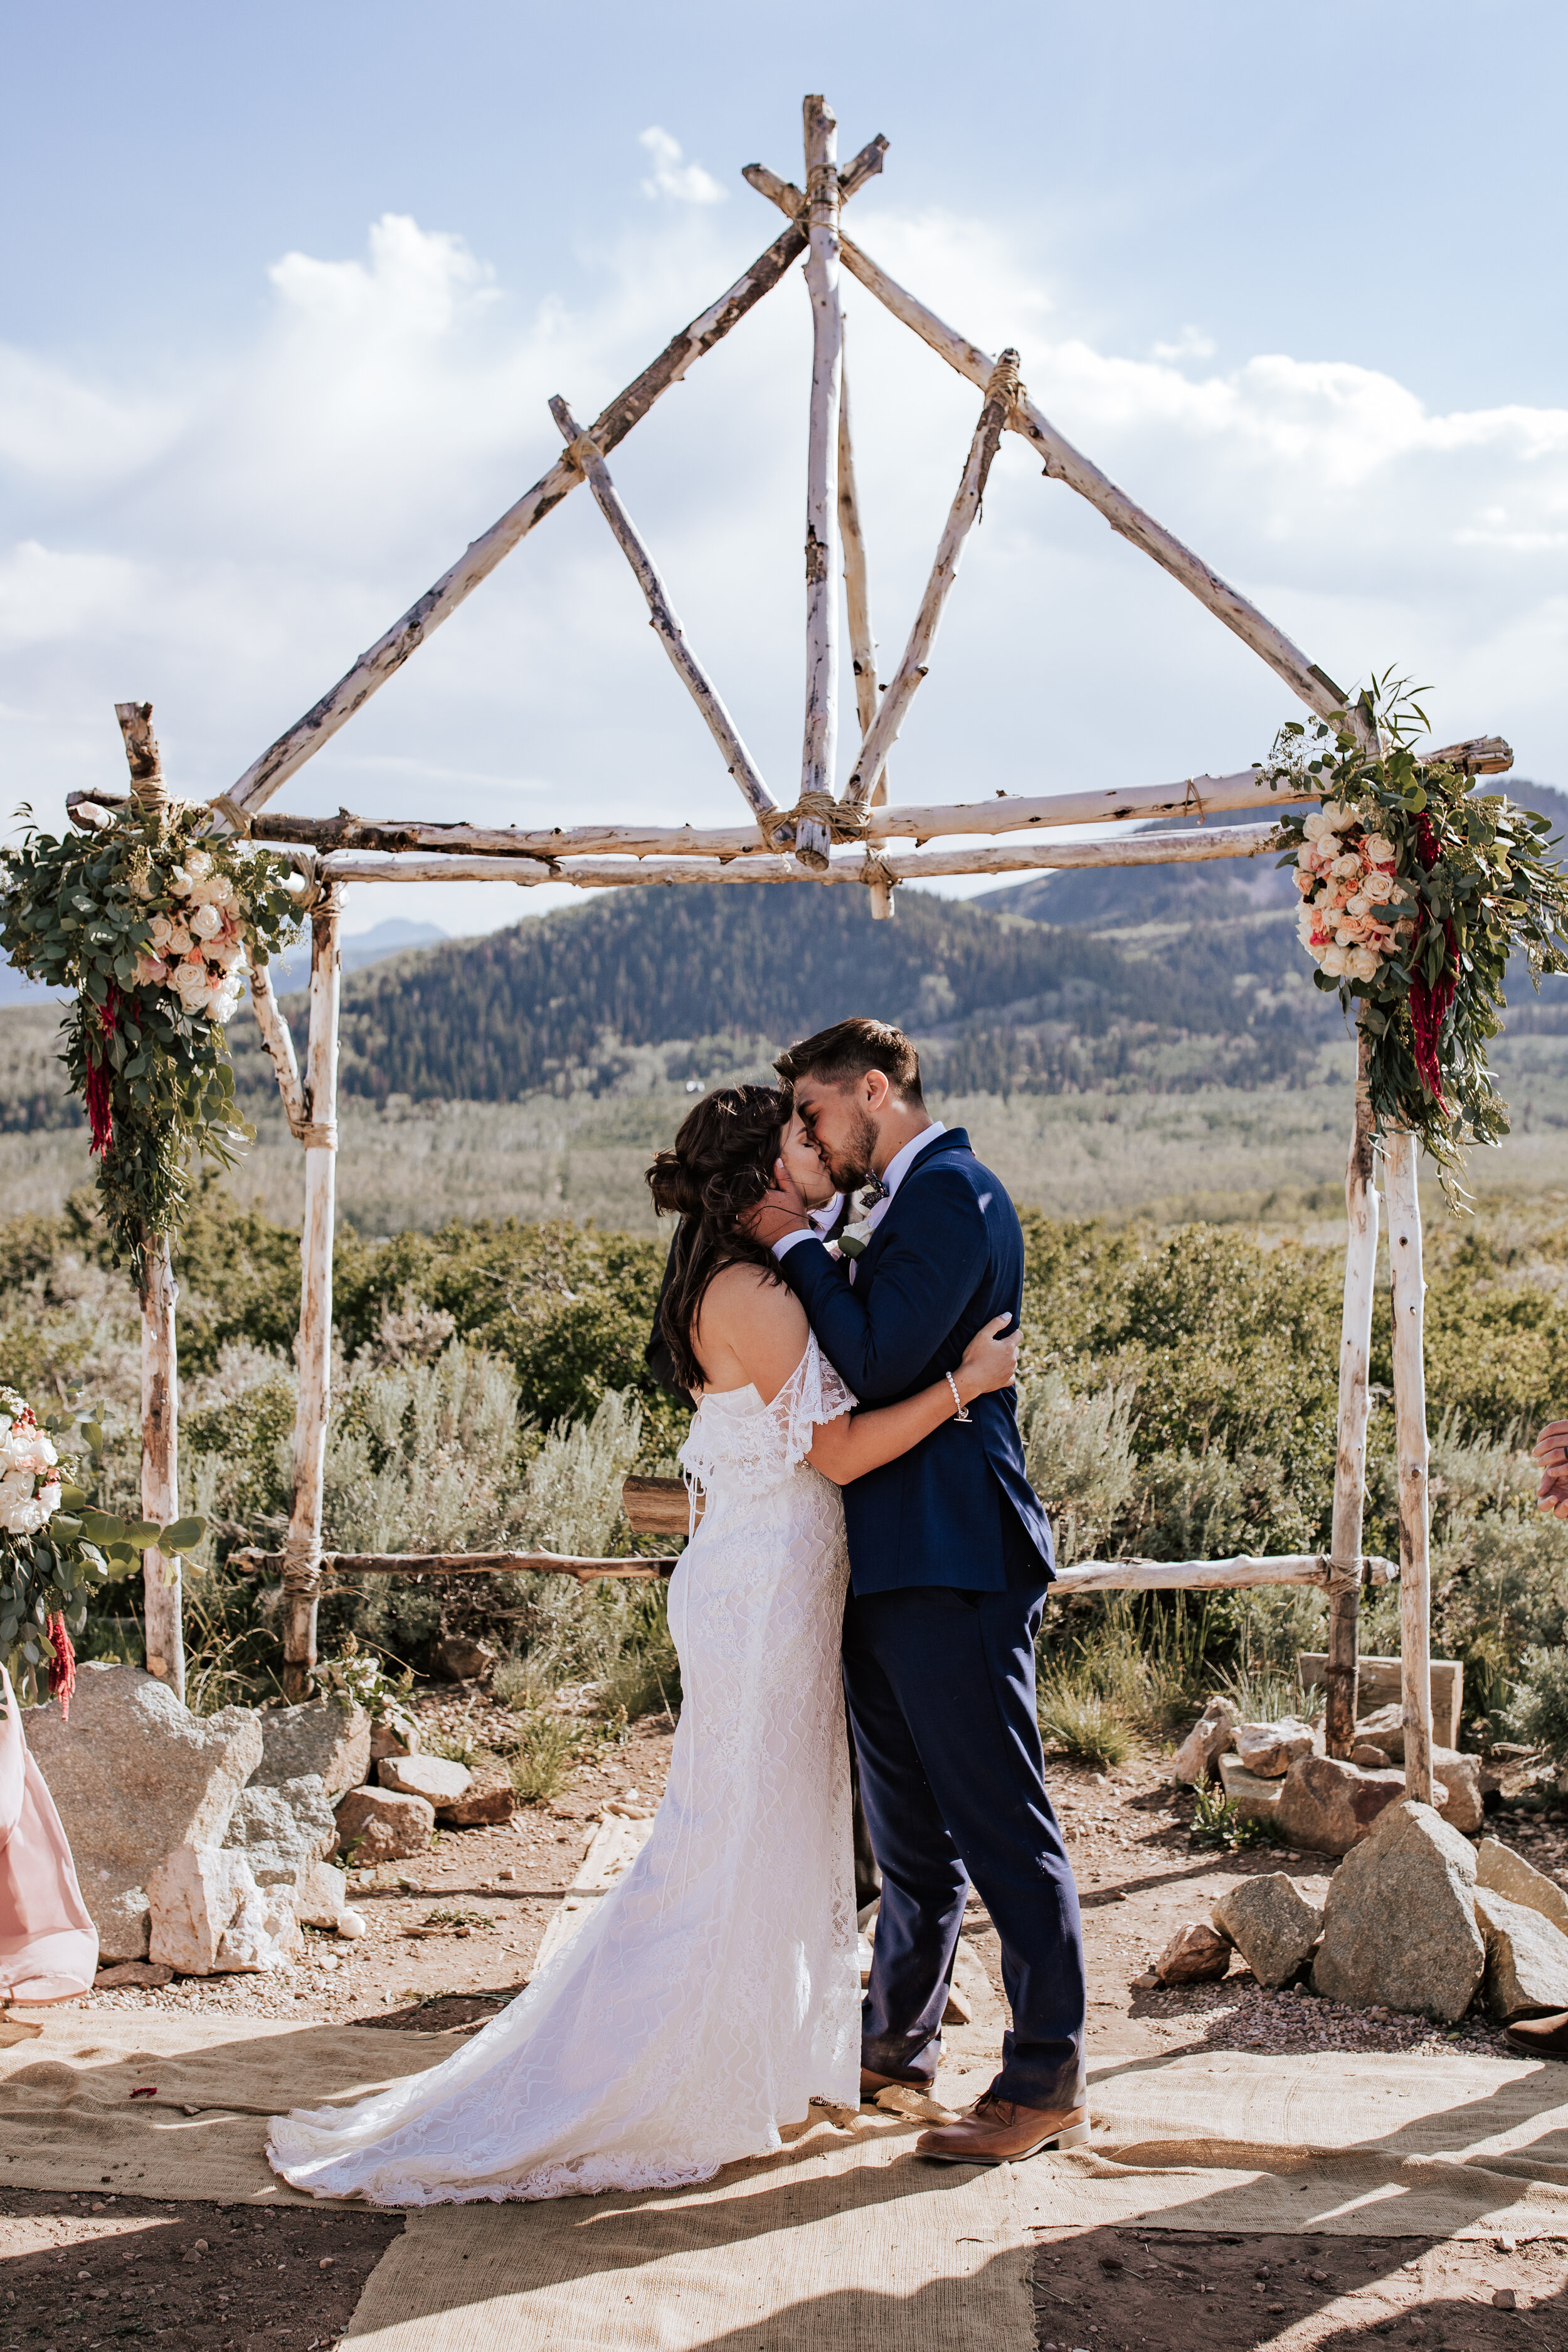  A couple kiss in front of a birch wood altar in the mountains of Utah by Emily Jenkins Photography a west coast elopement photographer. wooden mountain alter reasons to elope Utah mountain elopement #emilyjenkinsphotography #emilyjenkinselopements #